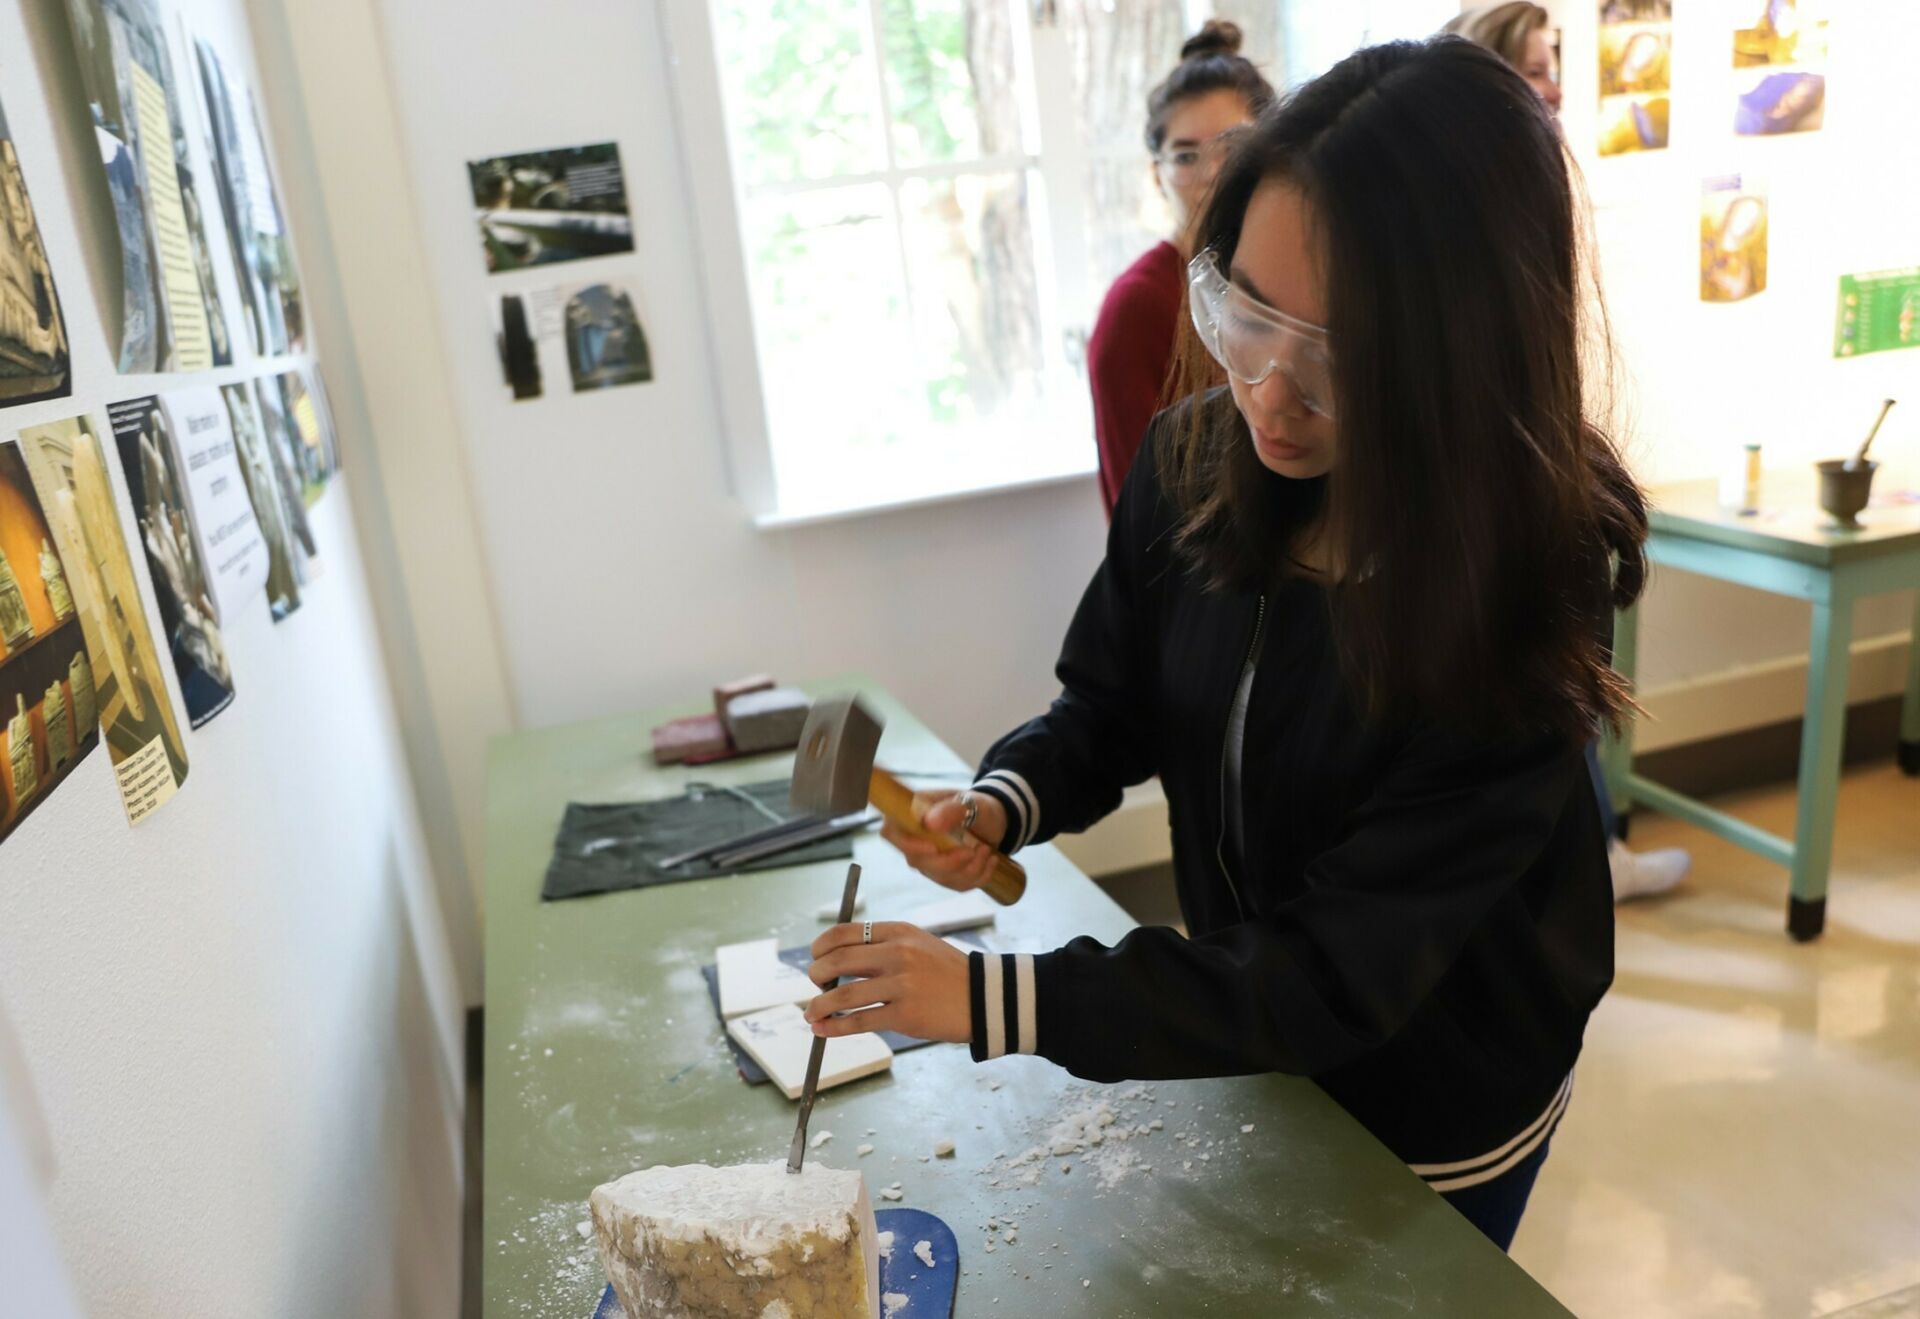 Student participating in the Borland Project Space "Rocks, Minerals and the History of Art" by Heather McCune Bruhn.